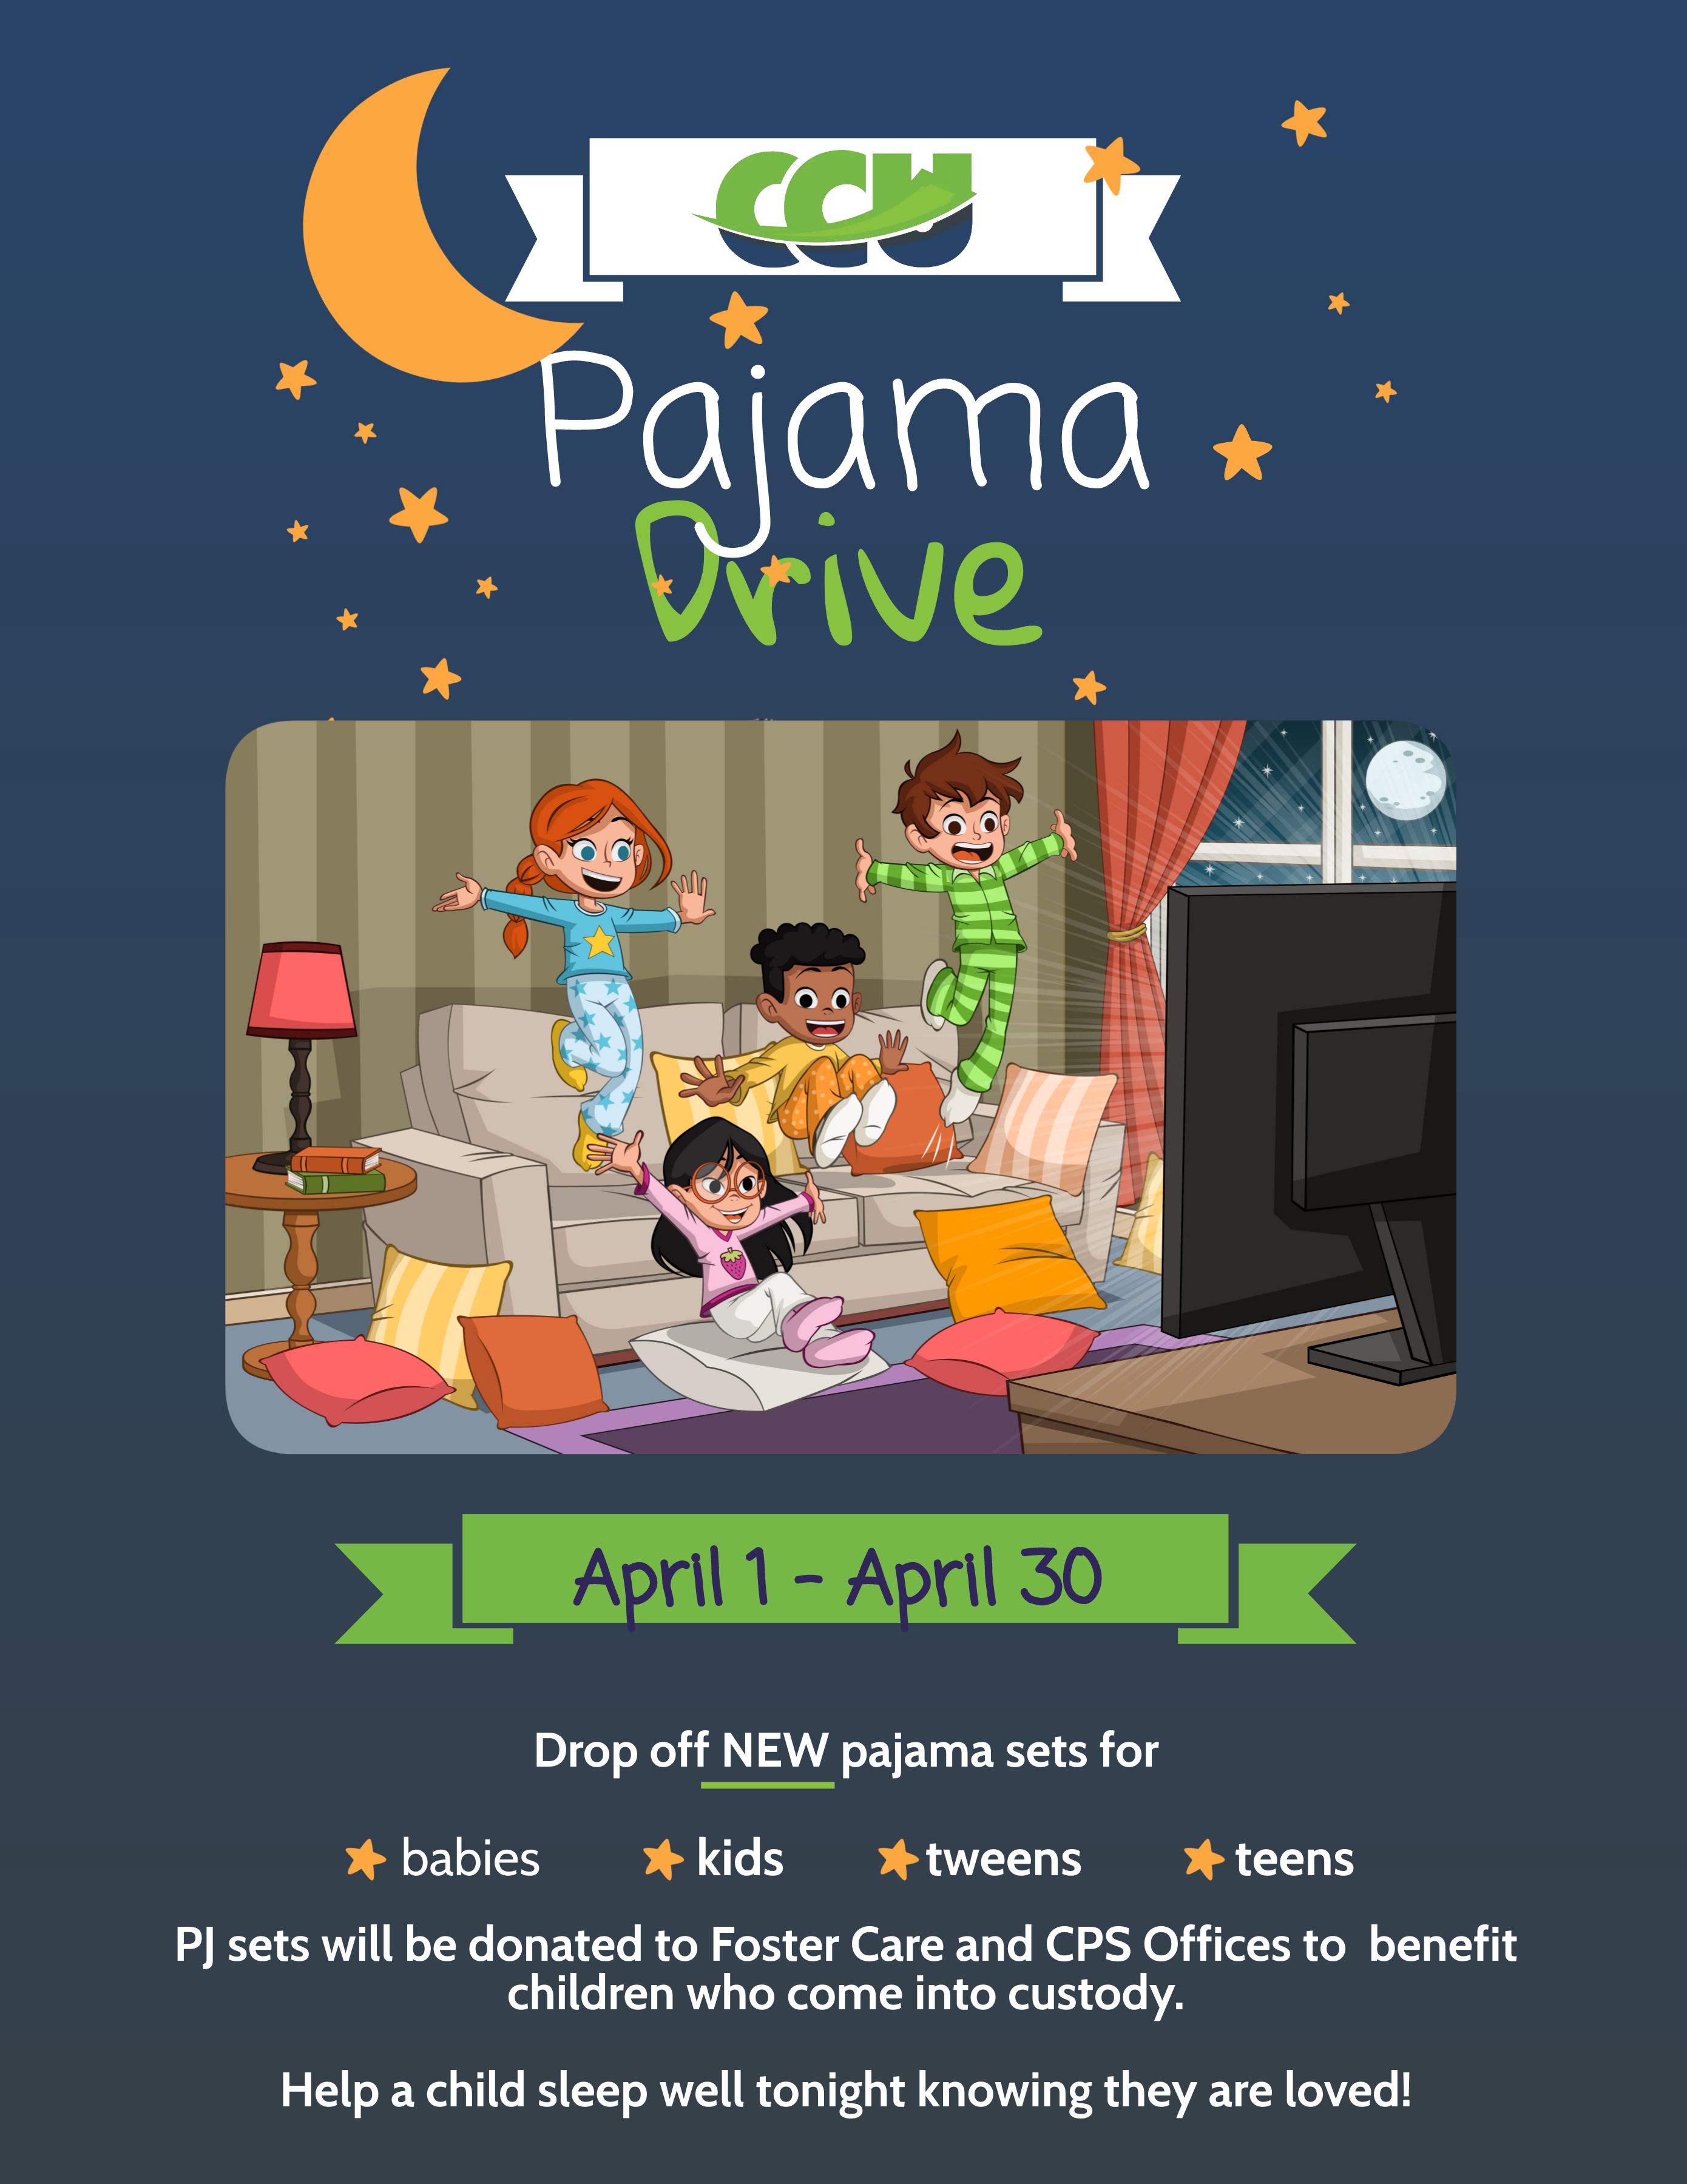 CCU Pajama Drive April 1 - April 30 in green font.  Image of four cartoon kids wearing pajamas in a living room jumping up and own on a couch.  White text says 'Drop off NEW pajama sets for babies, kids, tweens, and teens.  PJ sets will be donated to Foster Care and CPS Offices to benefit children who come into custody.  Help a child sleep well tonight knowing they are loved!